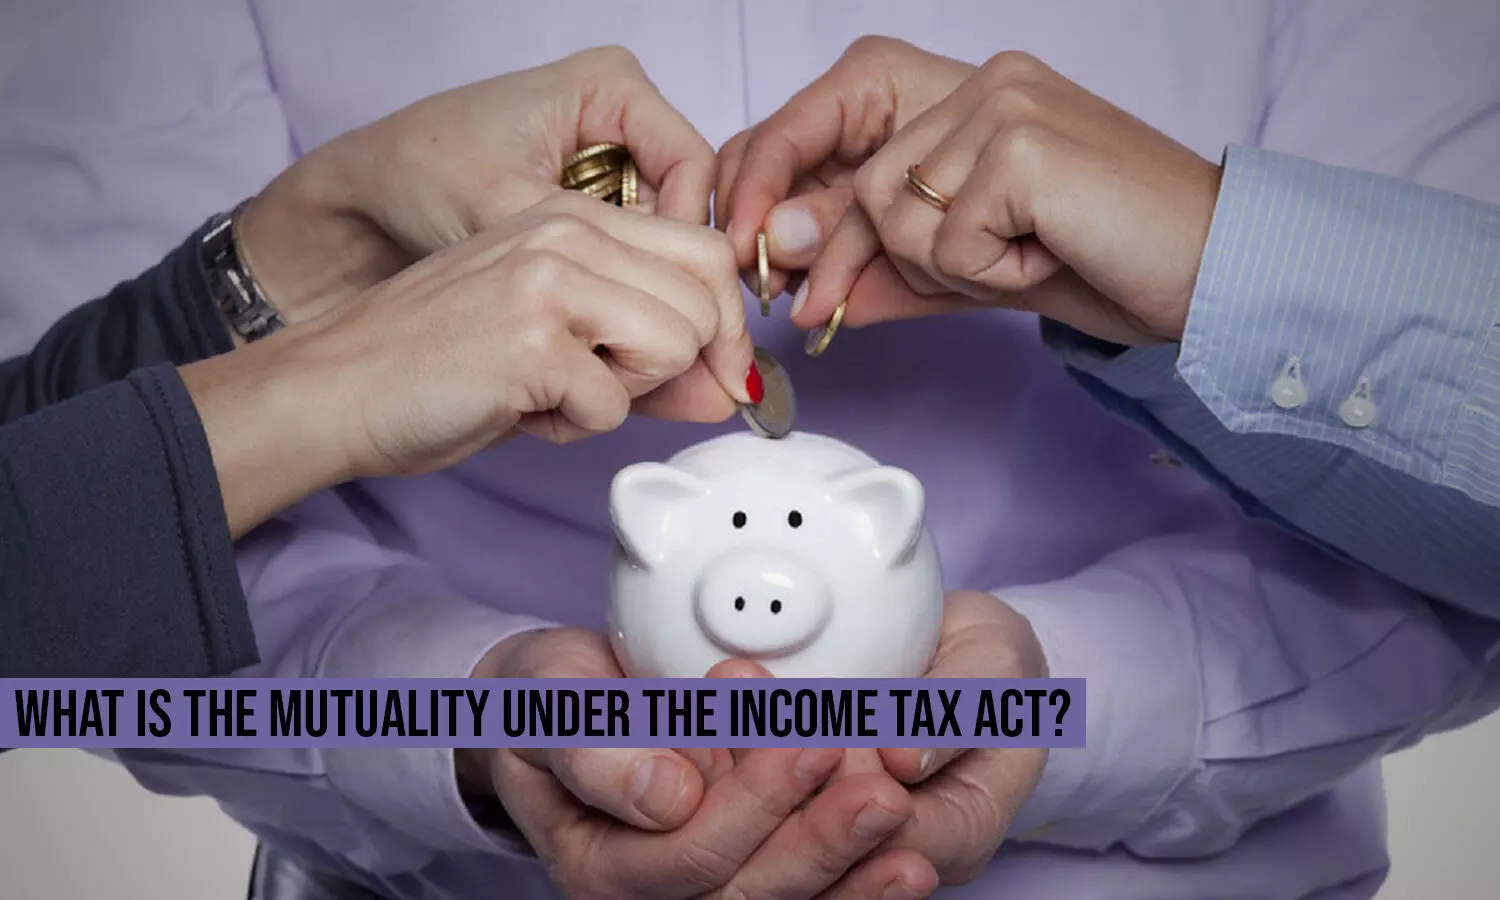 What is the mutuality under the Income Tax Act?